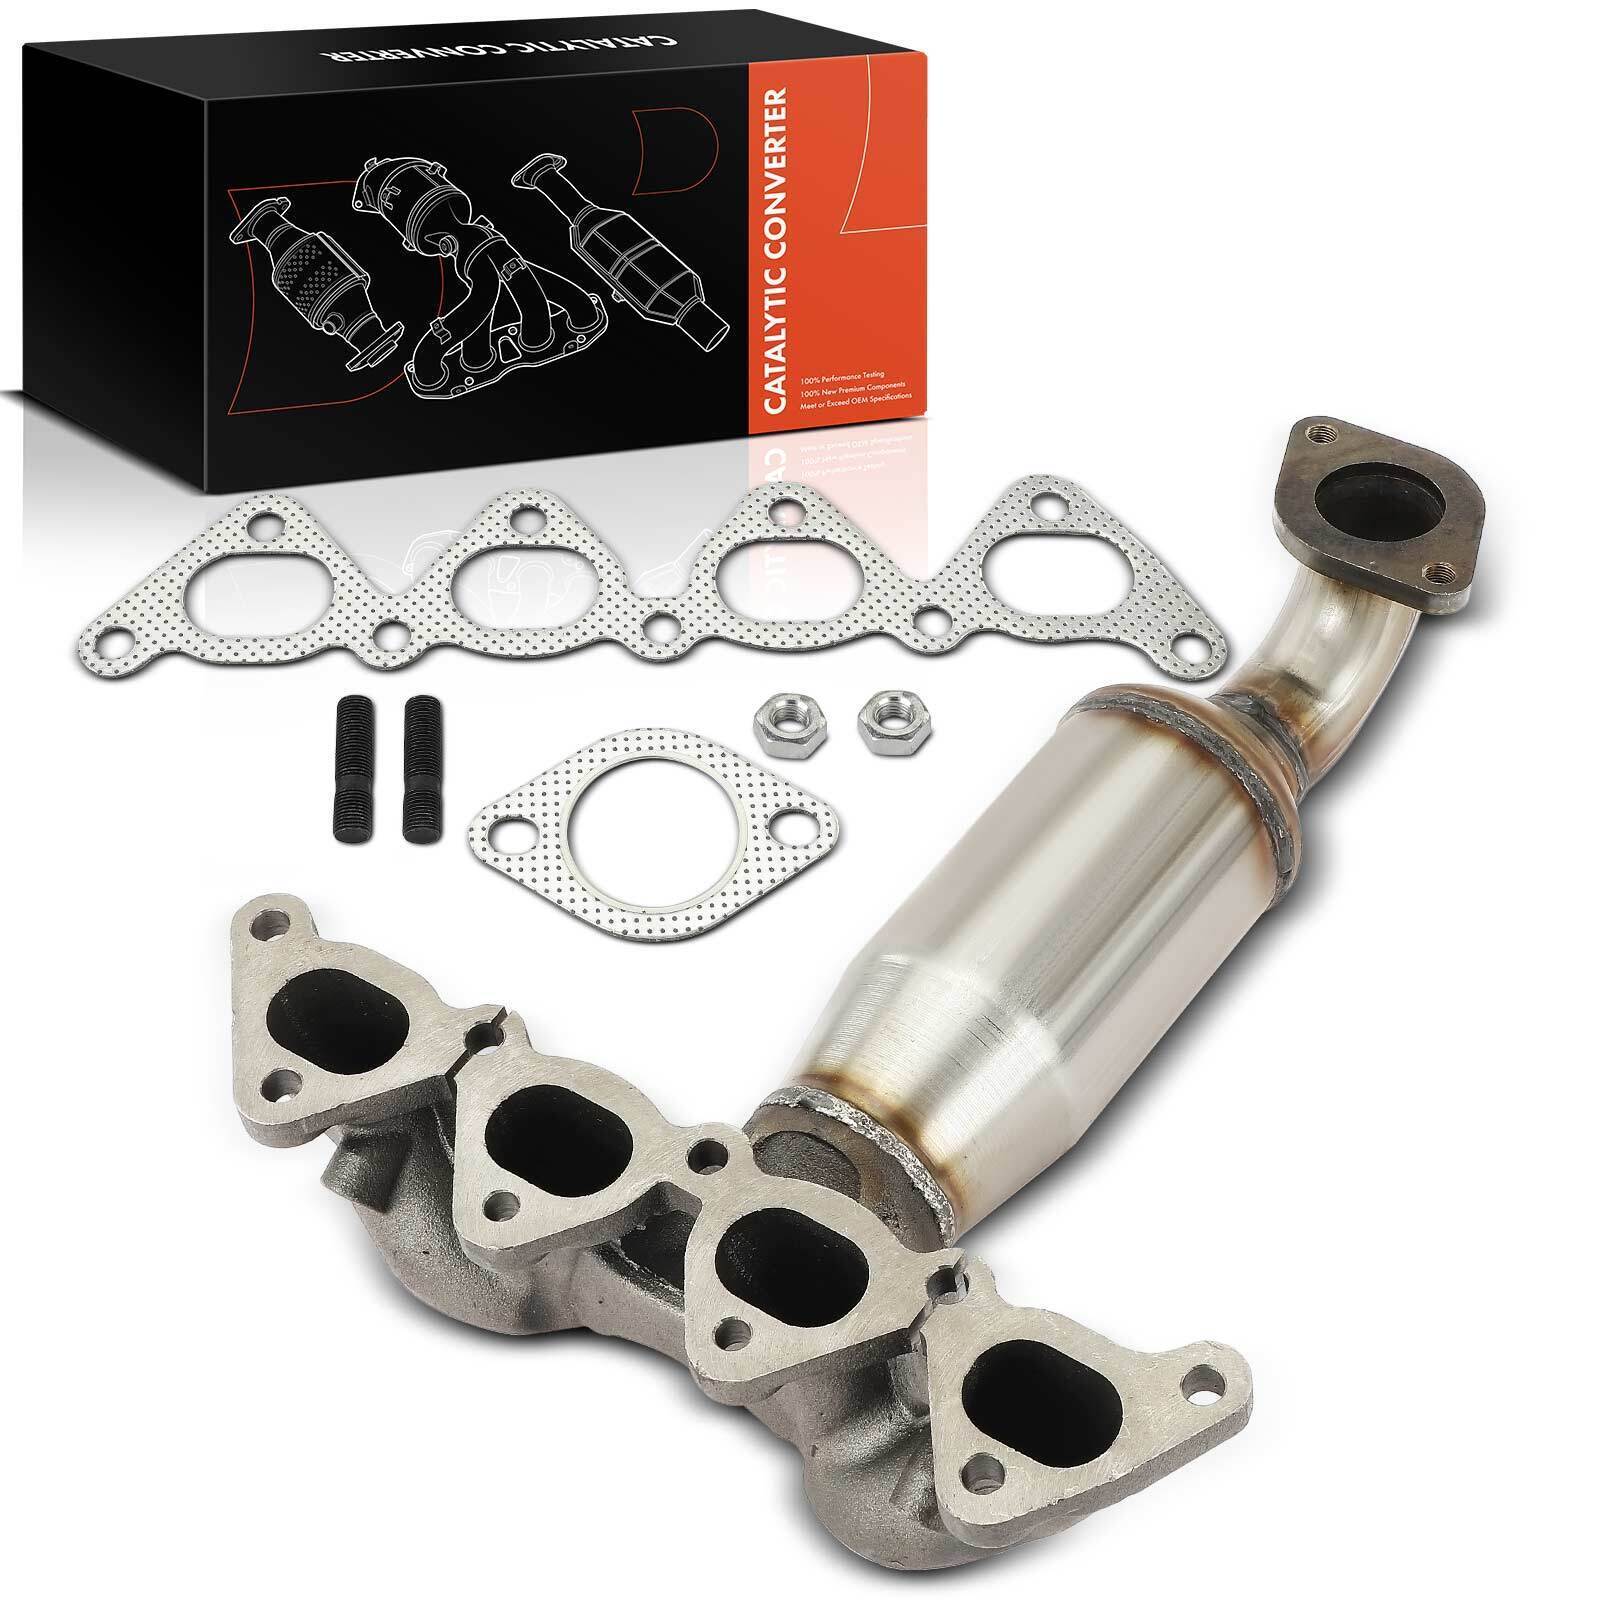 New Catalytic Converter with Integrated Exhaust Manifold for Hyundai Elantra Kia